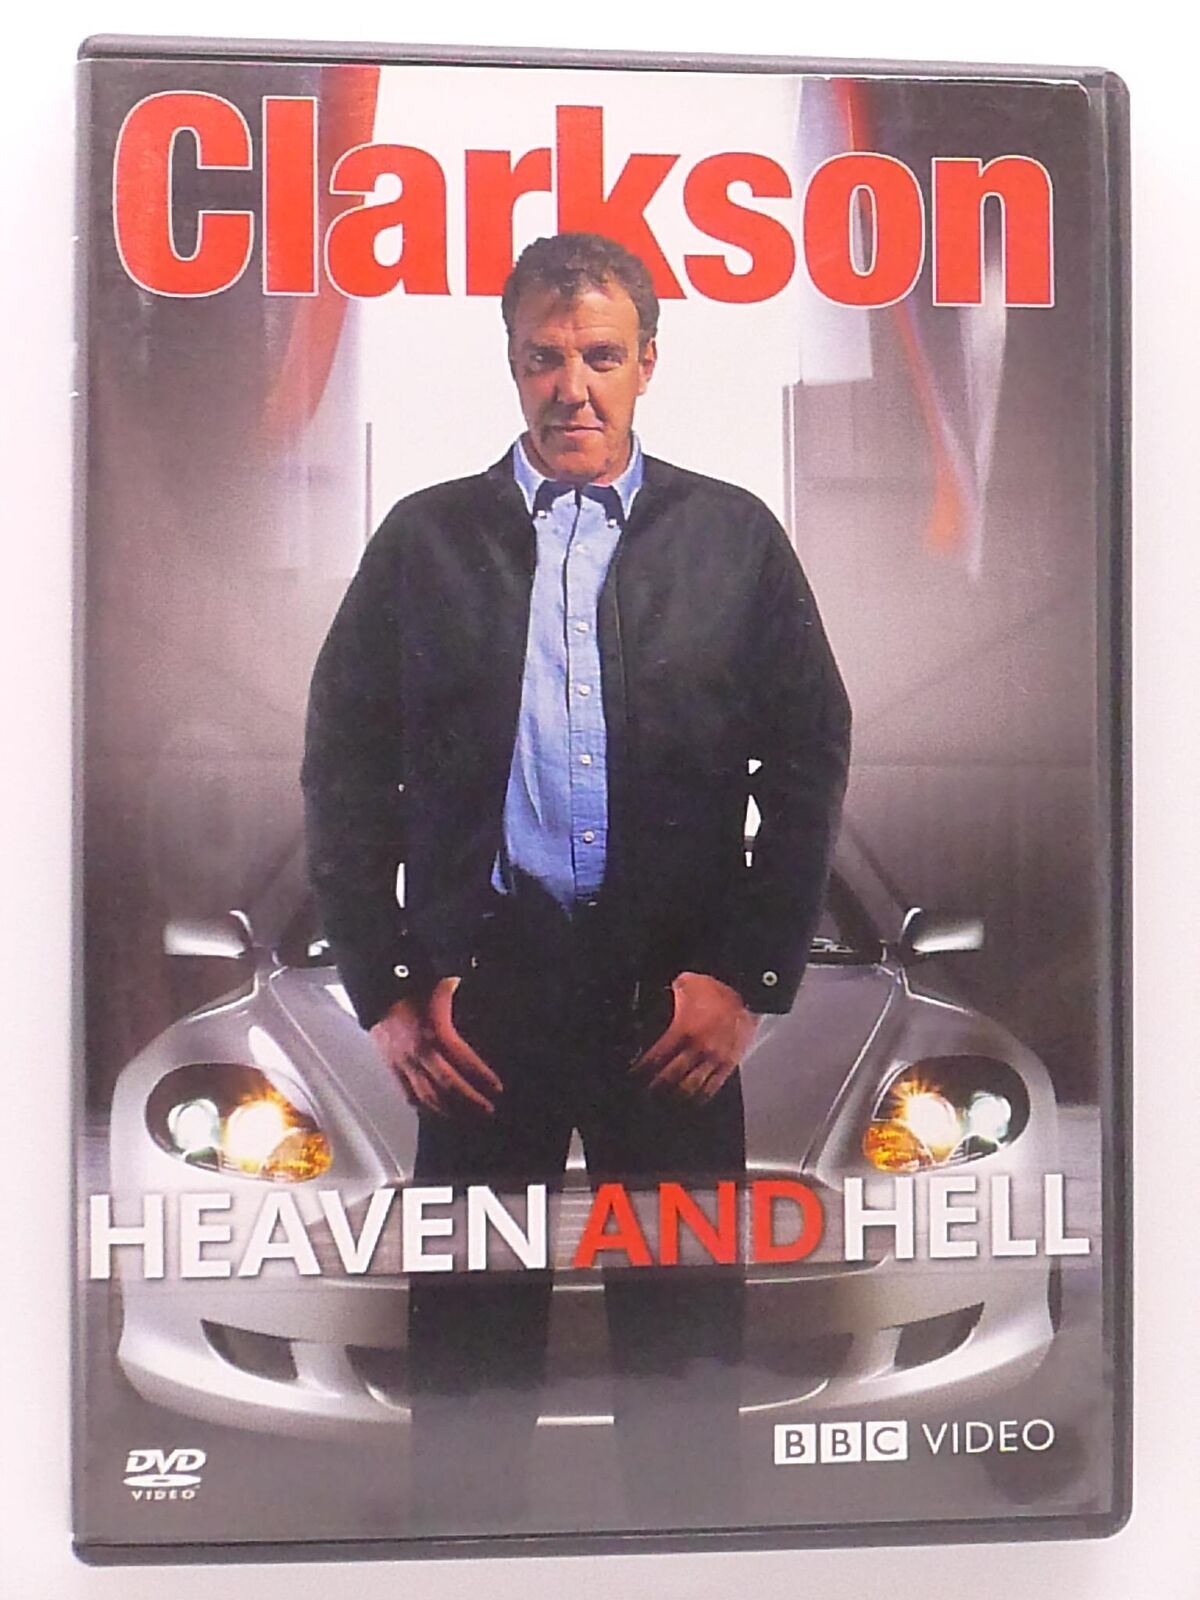 Clarkson - Heaven and Hell (DVD, BBC, 2005) - J0319